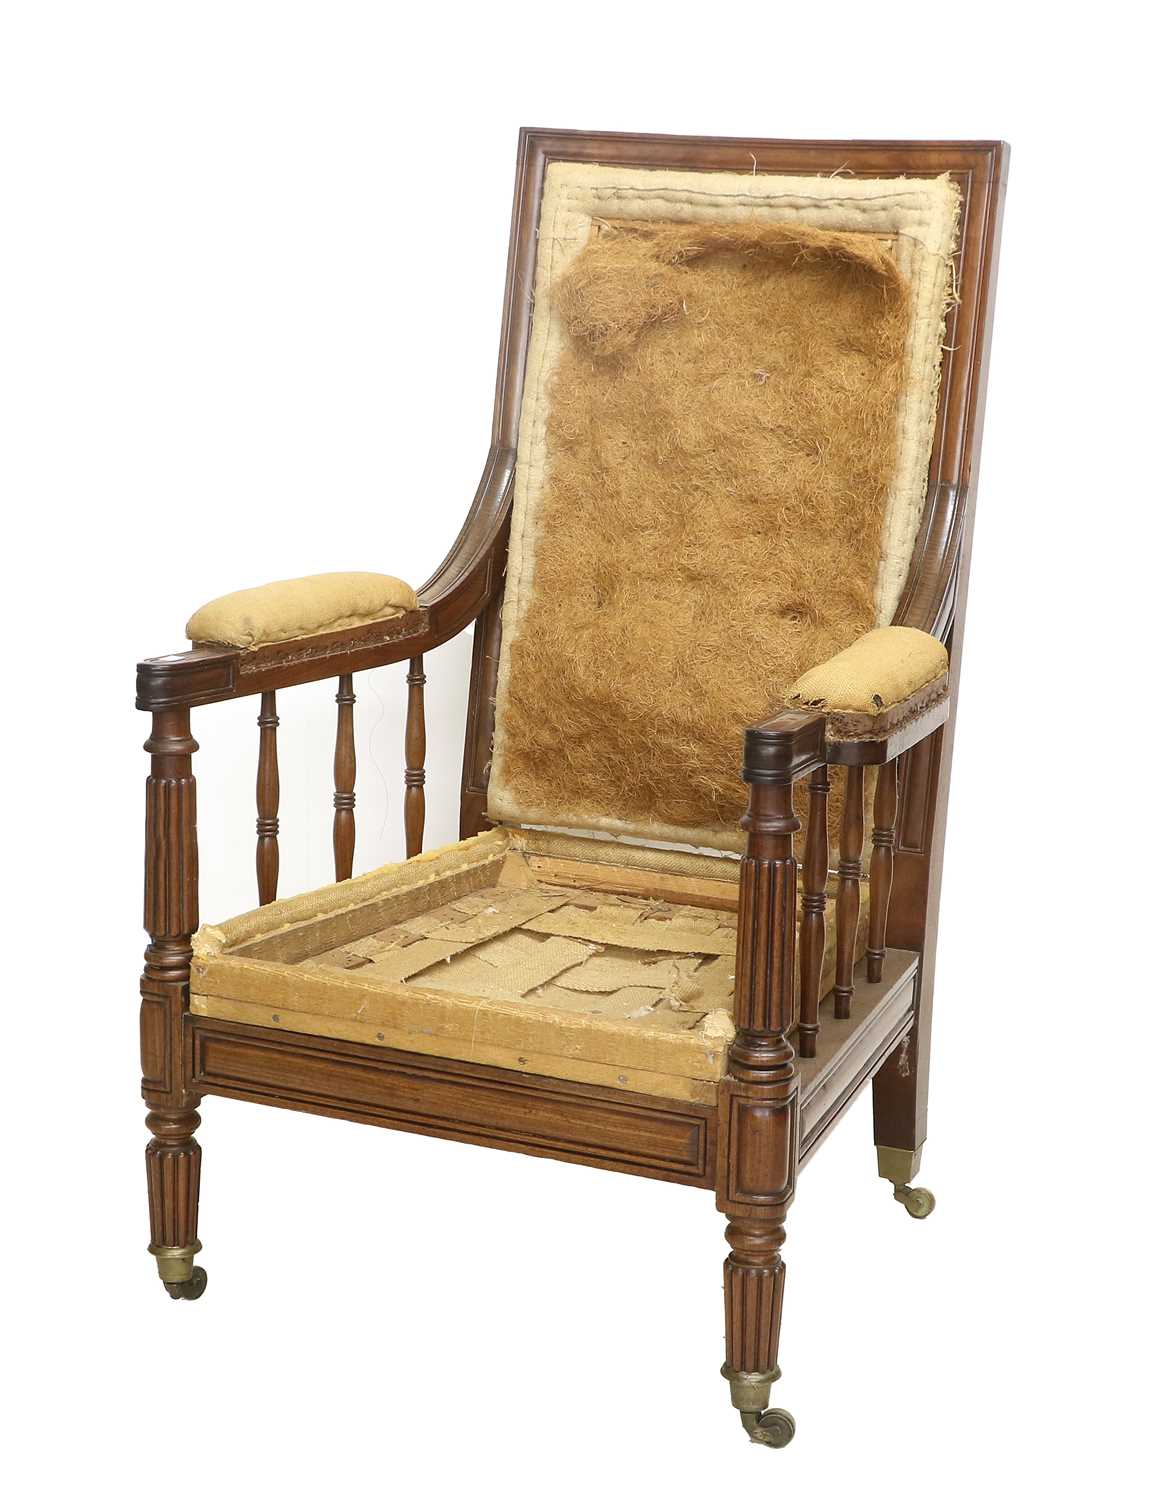 A George IV Mahogany Chair Frame, 2nd quarter 19th century, the moulded frame above a horsehair back